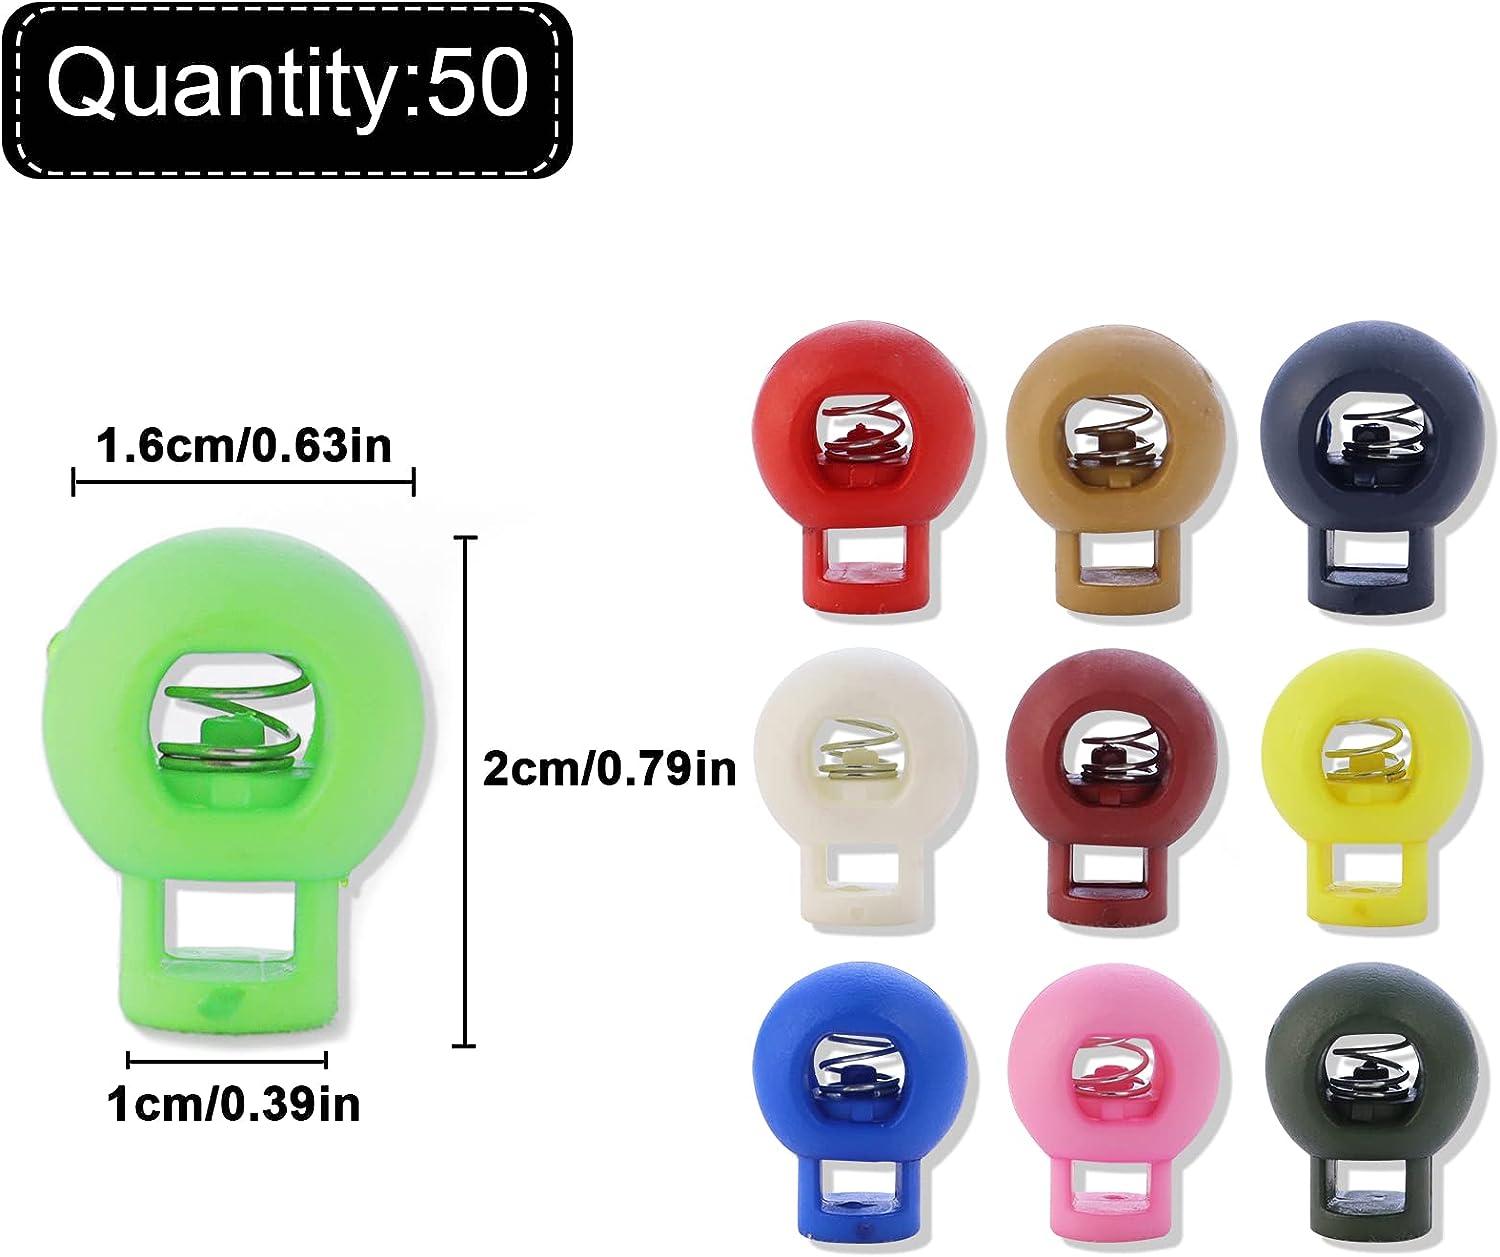  NODG 50 Pcs Assorted Colors Lanyard String Cord Clips Plastic  Round Ball Shape Fastener Slider Toggles Clip Spring Cord Lock End Round  Toggle Stoppers for Drawstrings Bags Shoelaces Backpacks : Arts